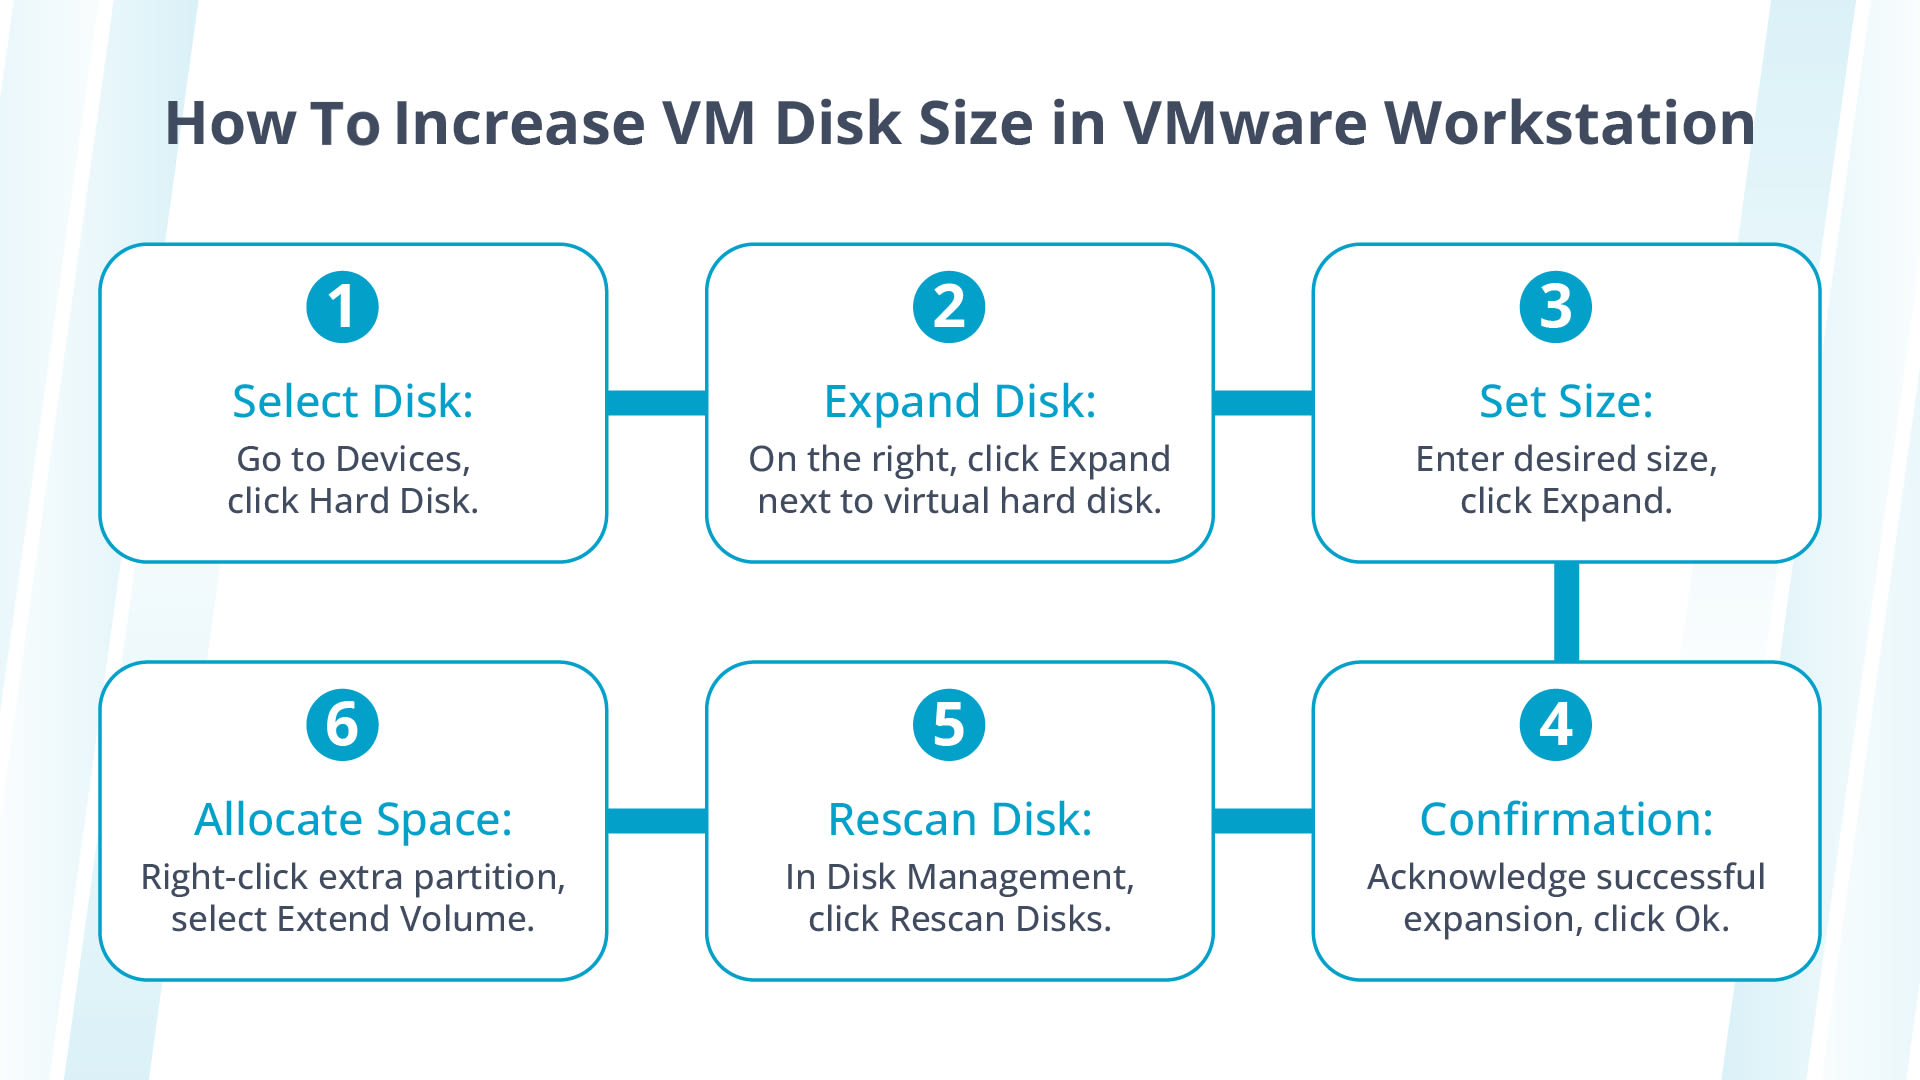 Steps on how to increase VMware disk size in VMware Workstation.